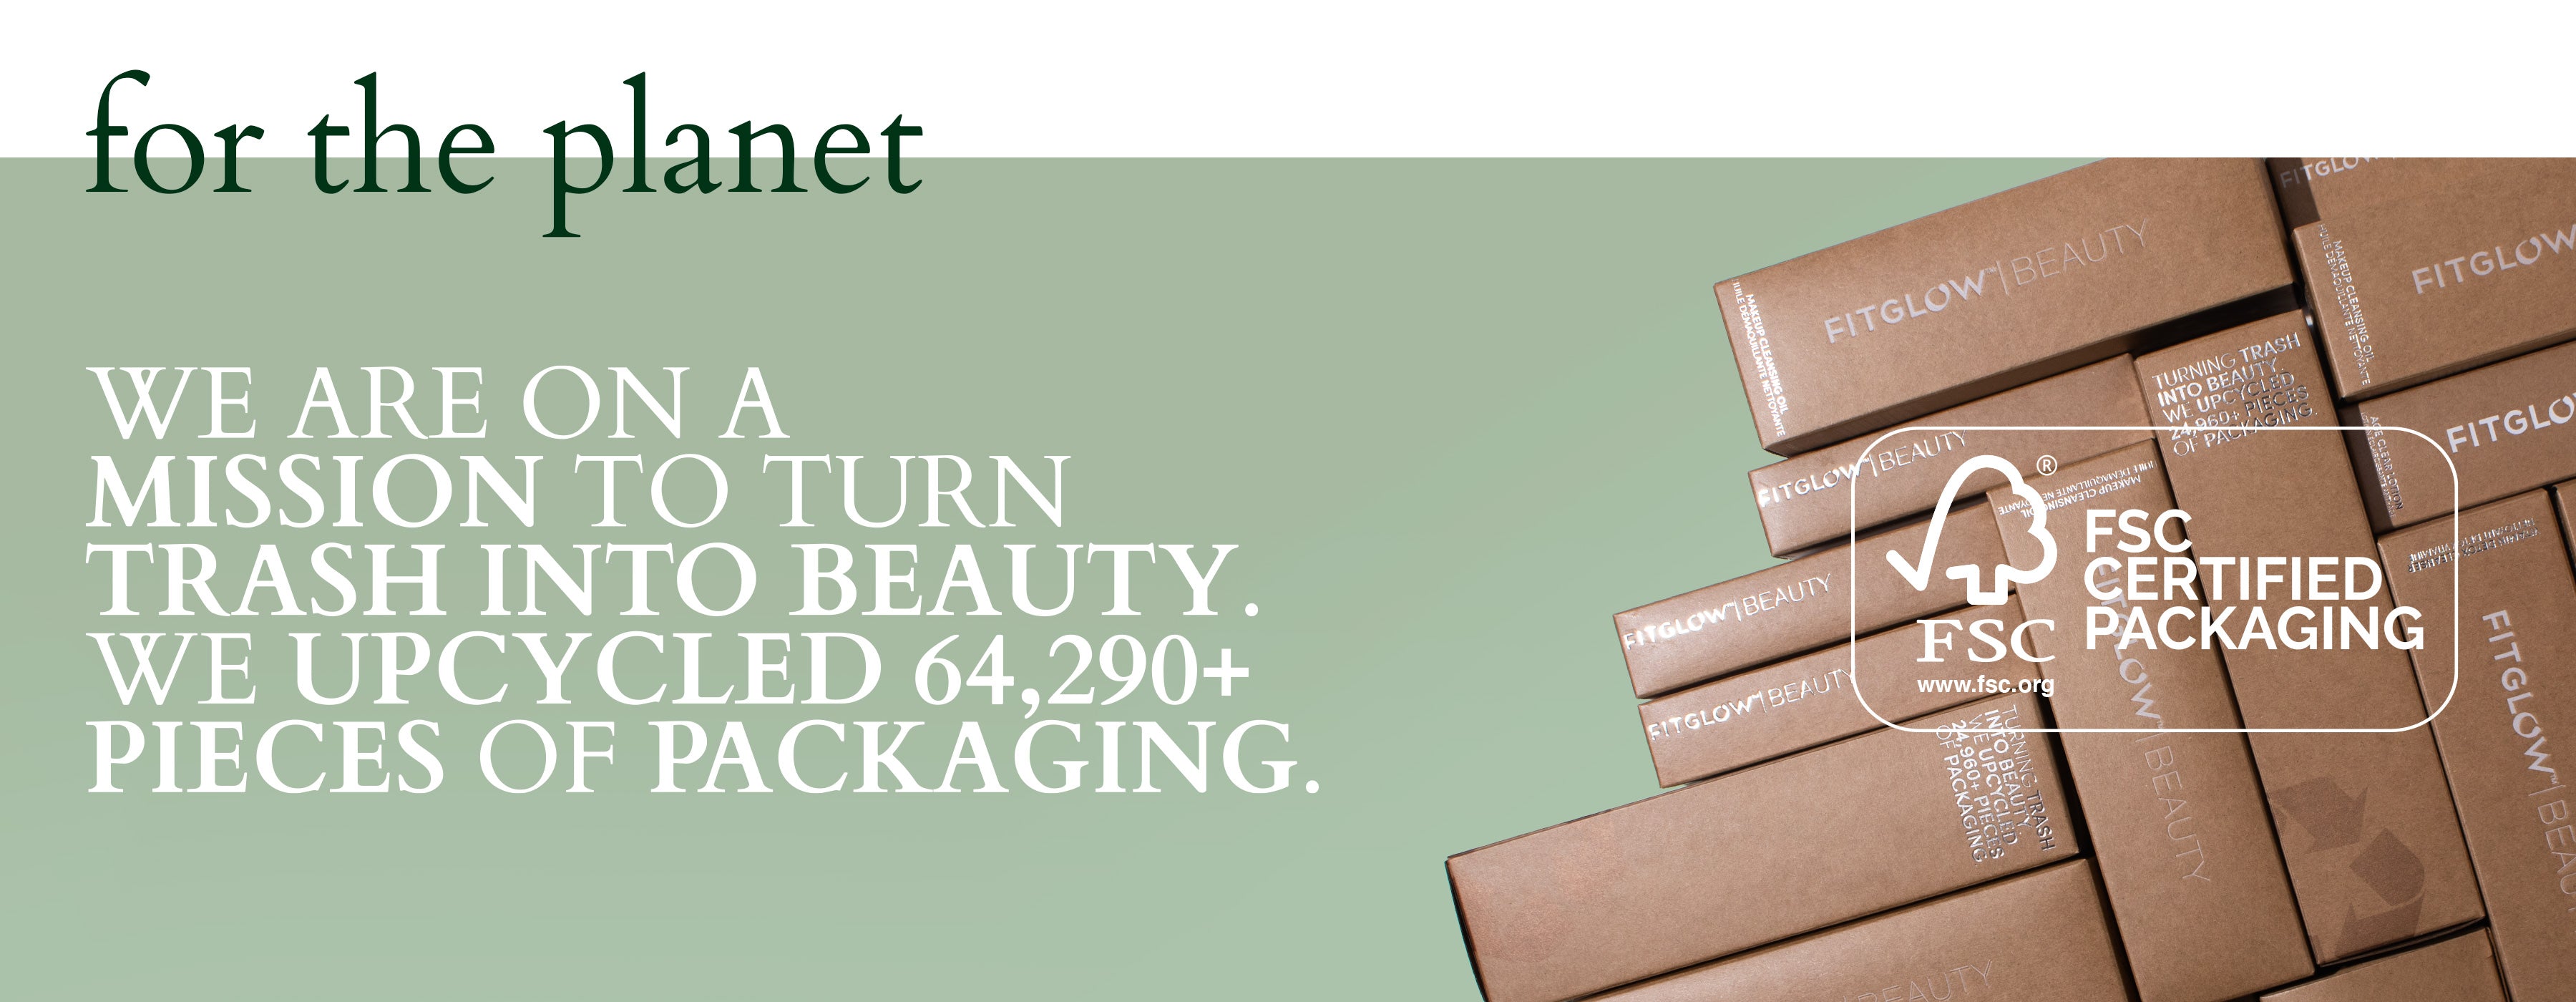 for the planet - we are on a mission to turn trash into beauty. We upcycled 64,290+ pieces of packaging. FSC Certified Packaging.